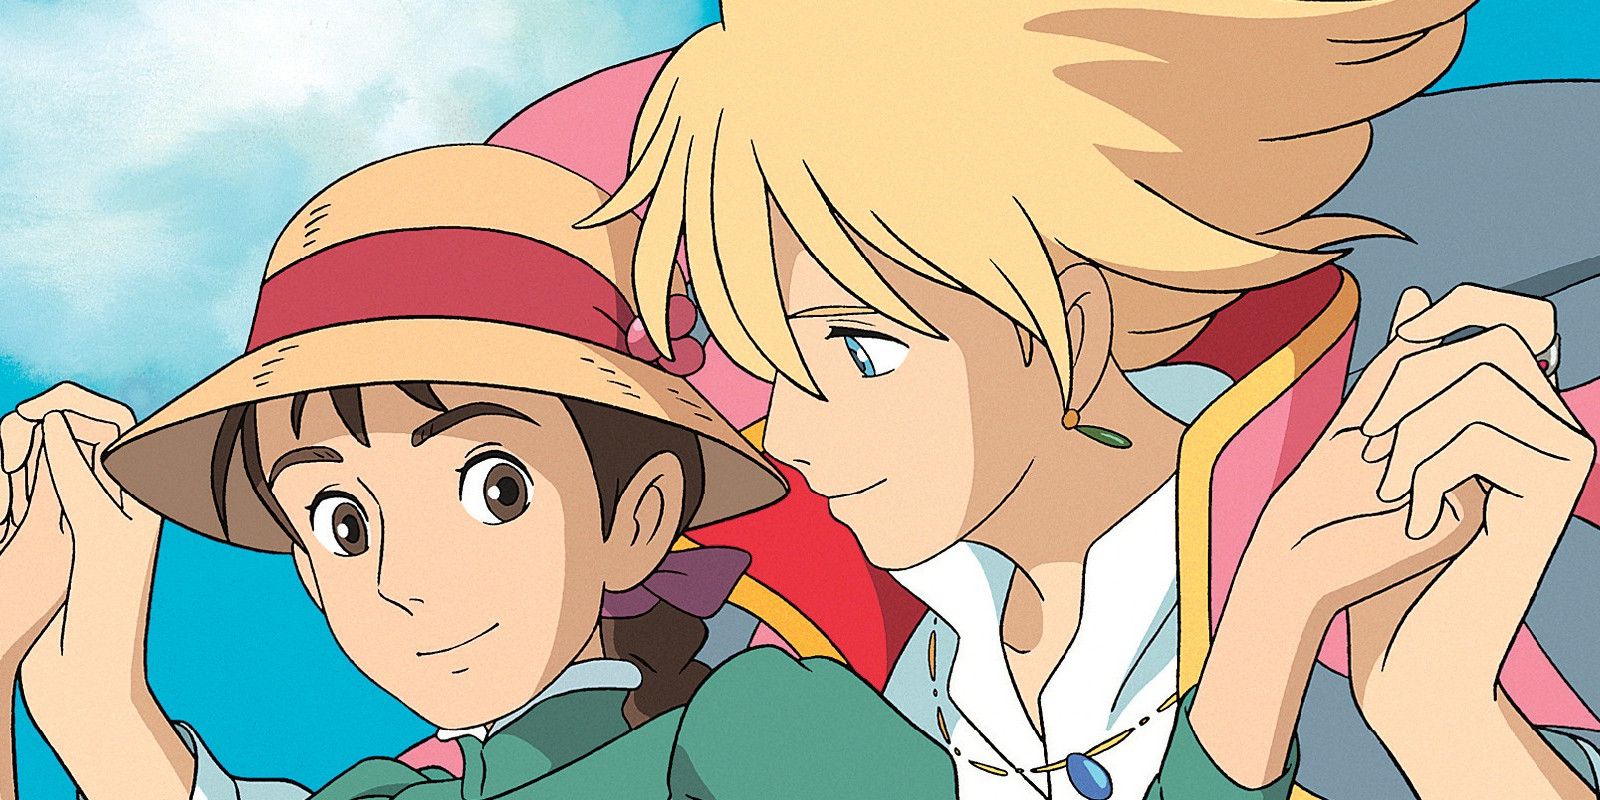 The Ending Of Howl's Moving Castle Explained